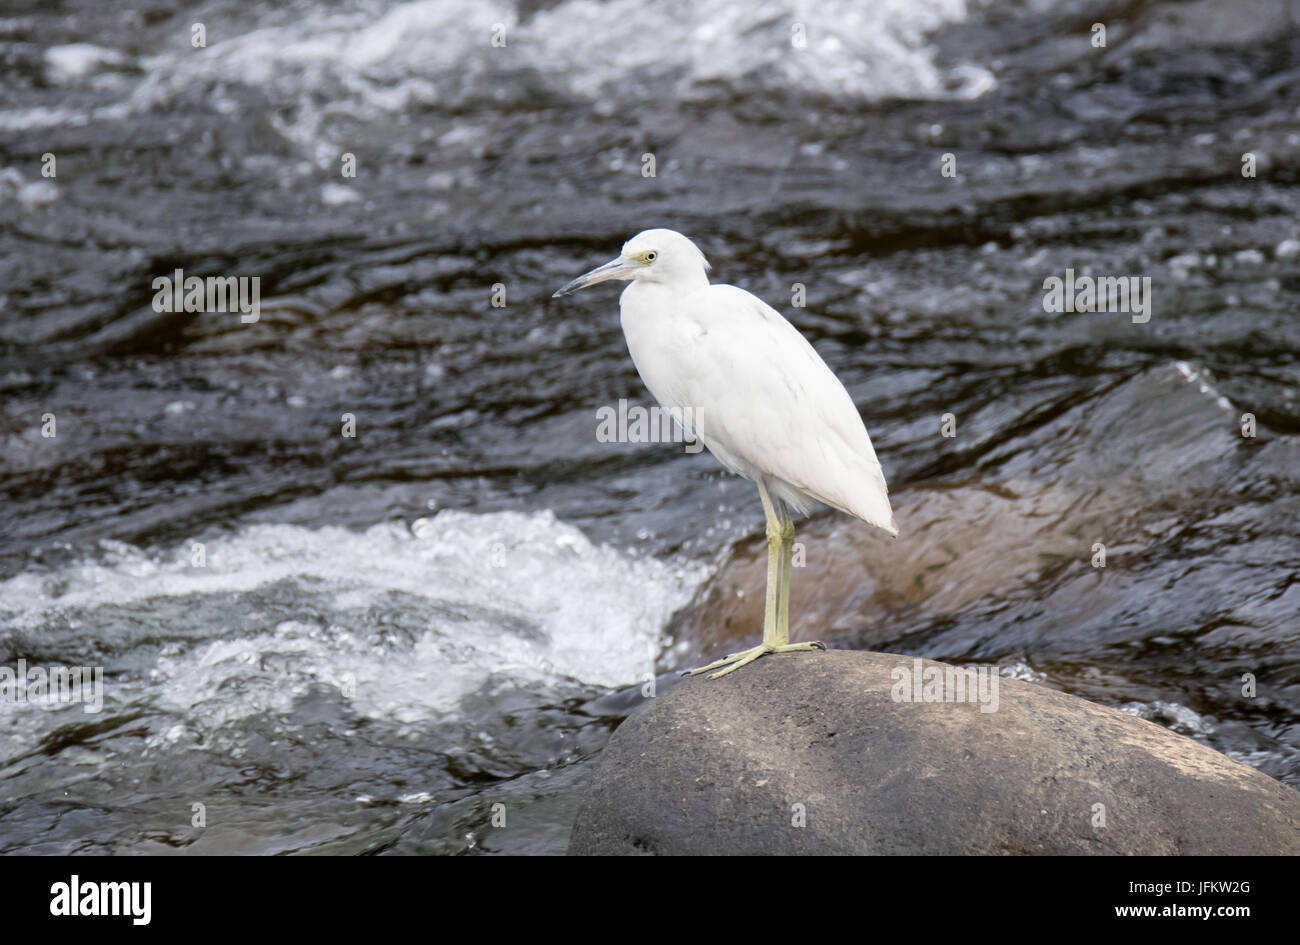 Juvenile Little Blue Heron standing on a rock in the river Stock Photo